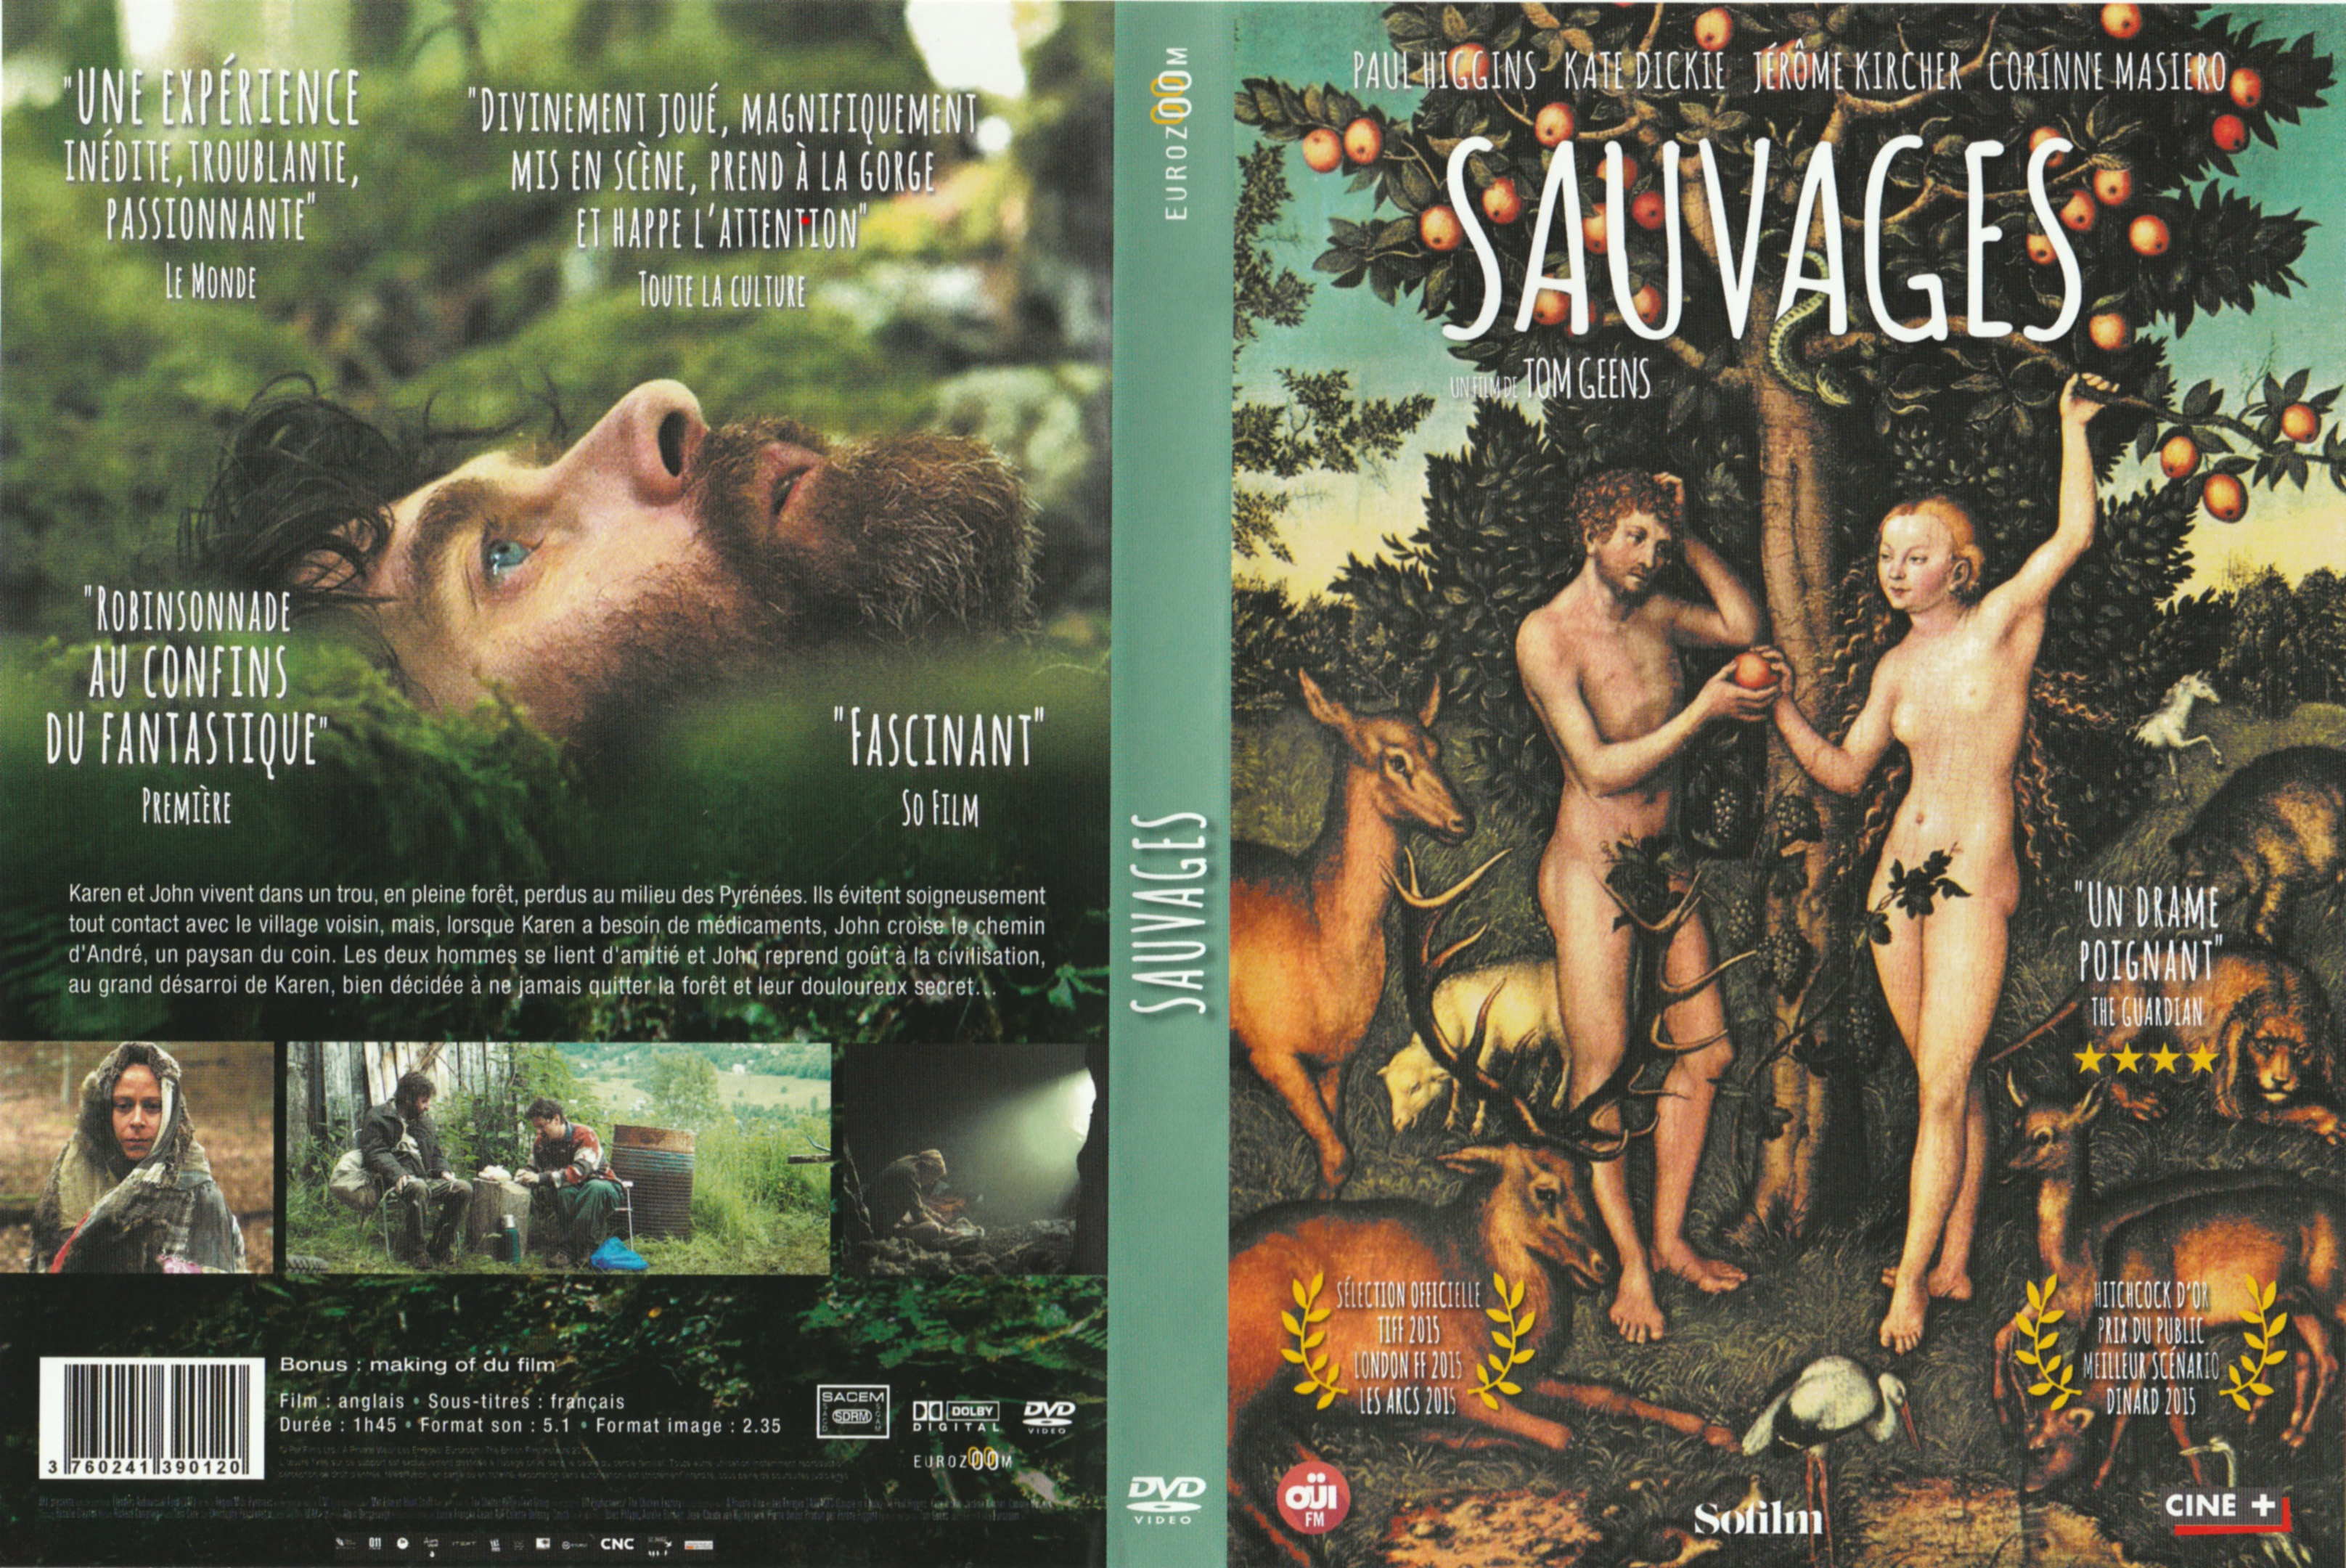 Jaquette DVD Sauvages